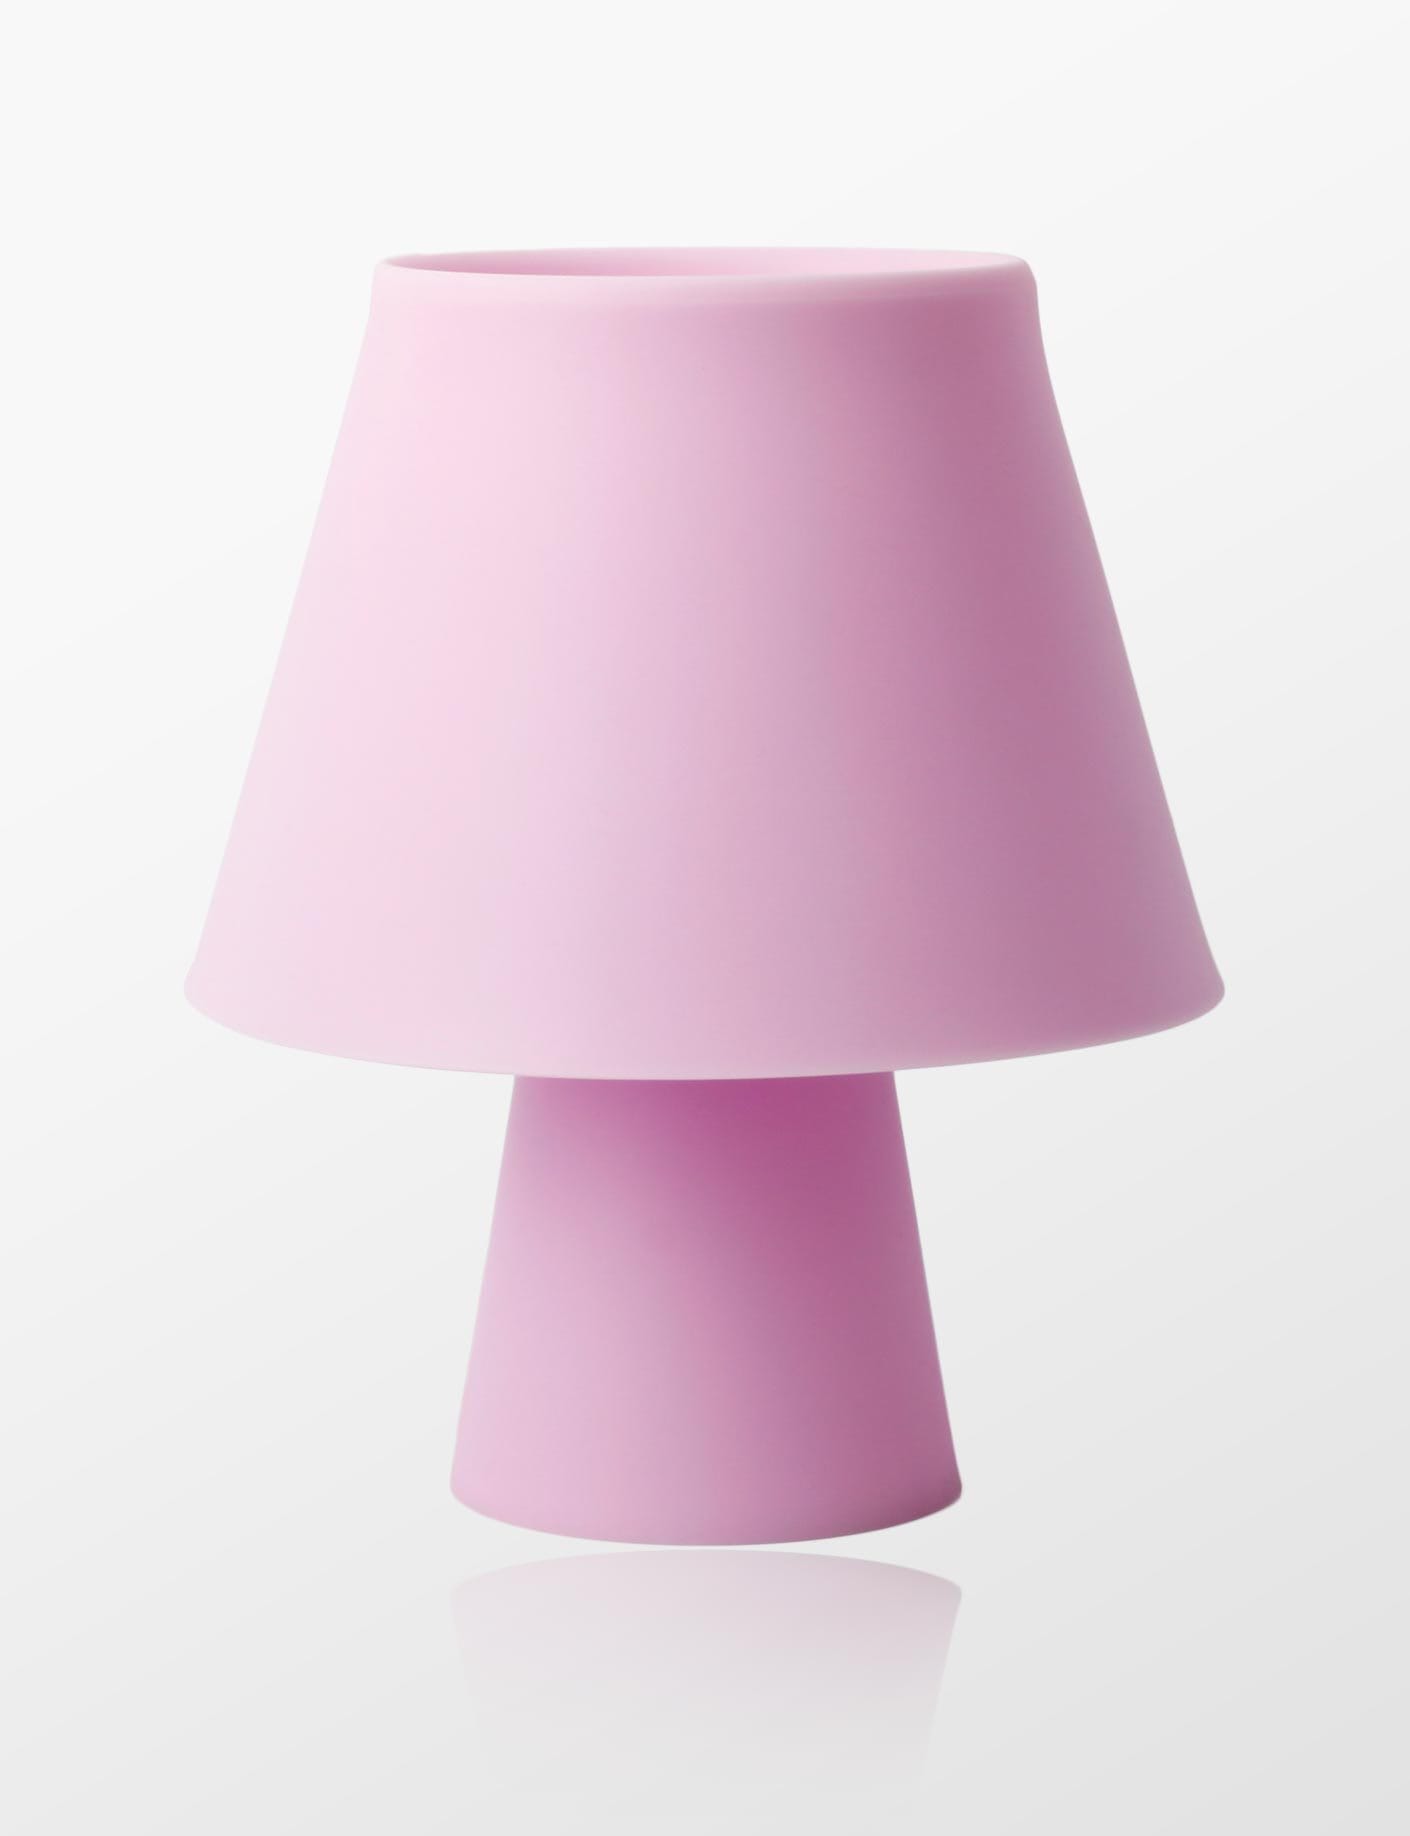 SEED DESIGN Numen Silicon Rubber Table lamp - DELIGHT OptoElectronics Pte. Ltd